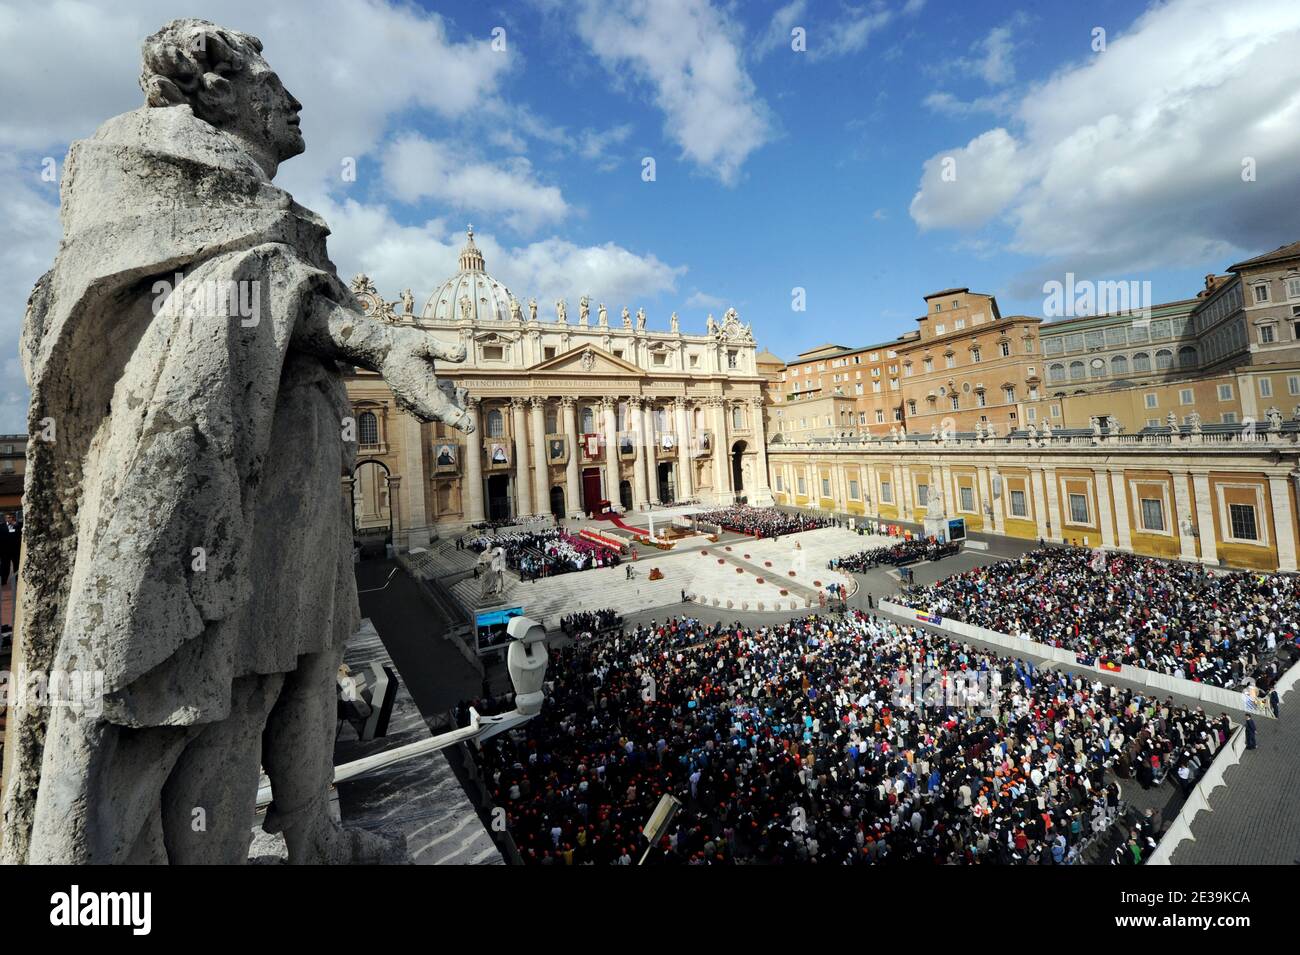 Tens of thousands of faithful attended an open-air canonization ceremony in Saint Peter's Square at the Vatican, in Rome, Italy, on October 17, 2010. Pope Benedict XVI proclaimed six new saints, including Andre Bessette from Canada, Mary of the Cross MacKillop from Australia, Stanislaw Kazimierczyk Soltys from Poland, Candida Maria de Jesus Cipitria y Barriola of Spain and Giulia Salzano and Battista Camilla da Varano from Italy. Photo by Eric Vandeville/ABACAPRESS.COM Stock Photo